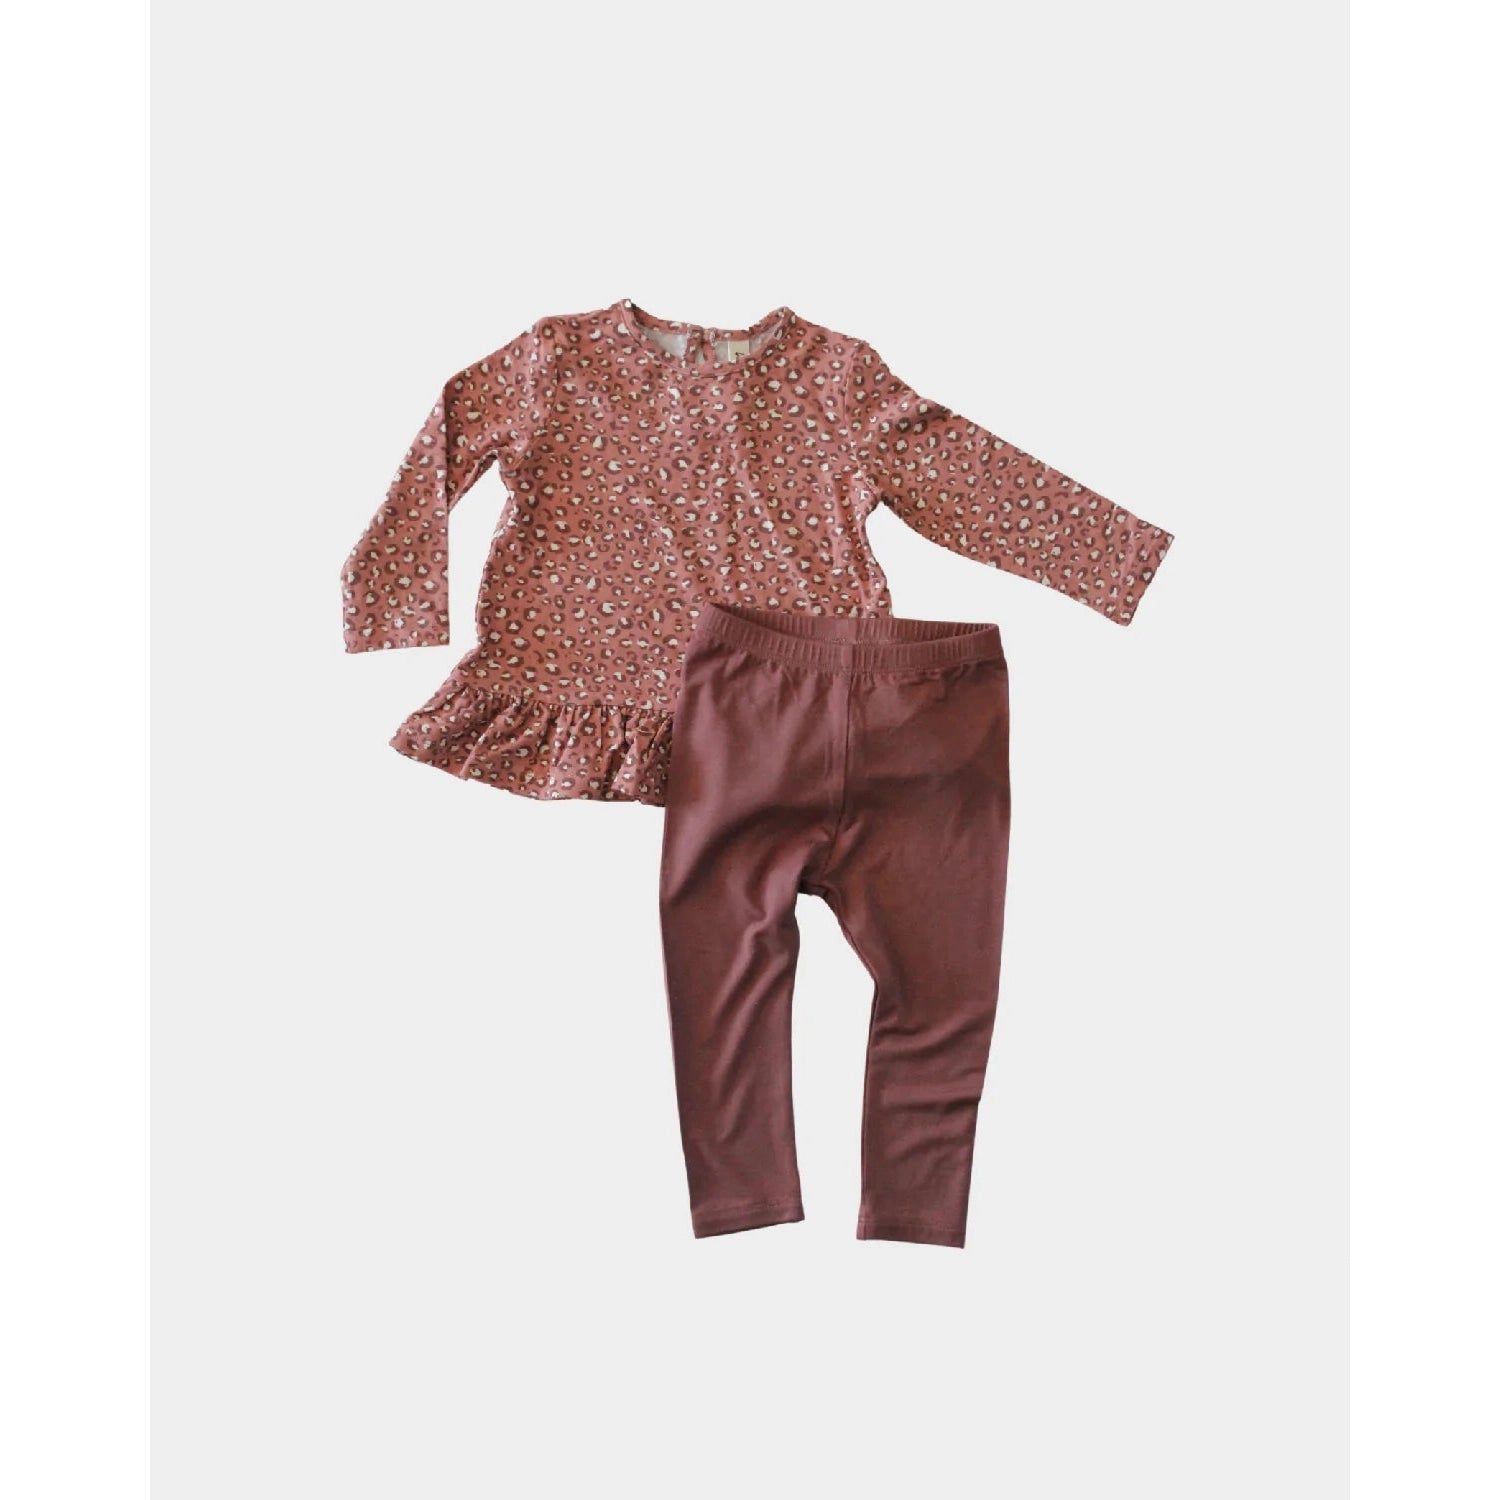 Baby Sprouts Rosewood Cheetah Peplum Top + Leggings Set-Baby Sprouts-Little Giant Kidz